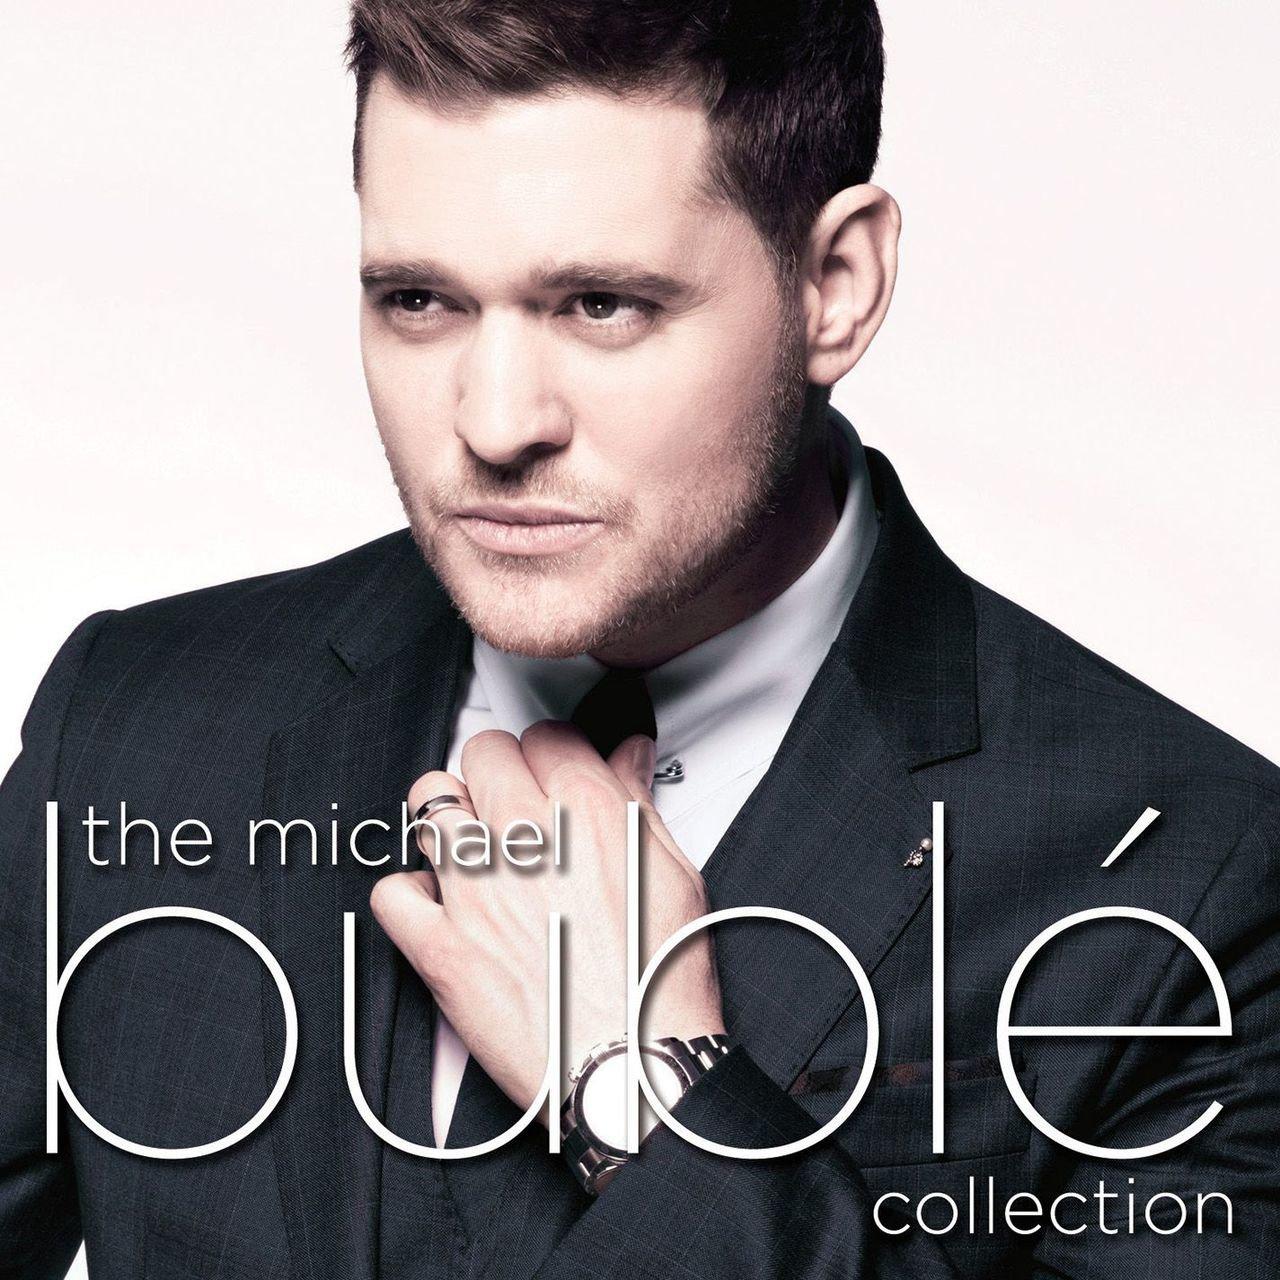 Listen to Collection by Michael Bublé on TIDAL